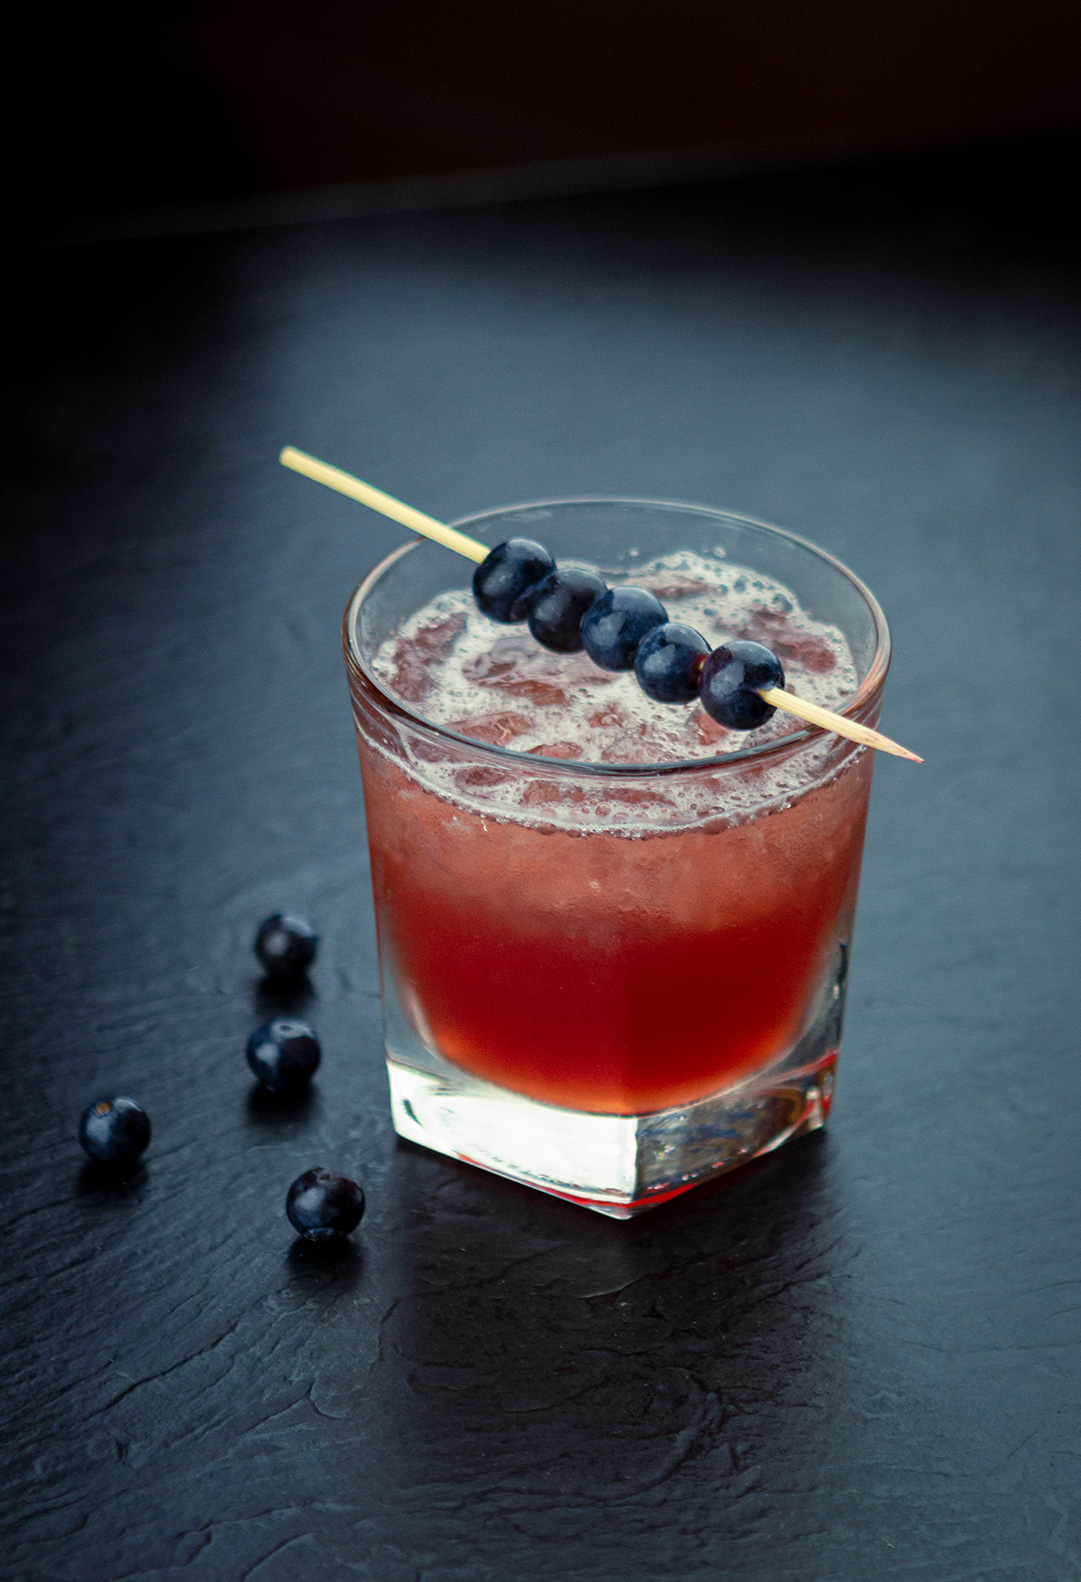 Blueberry cocktail with blue berries next to glass